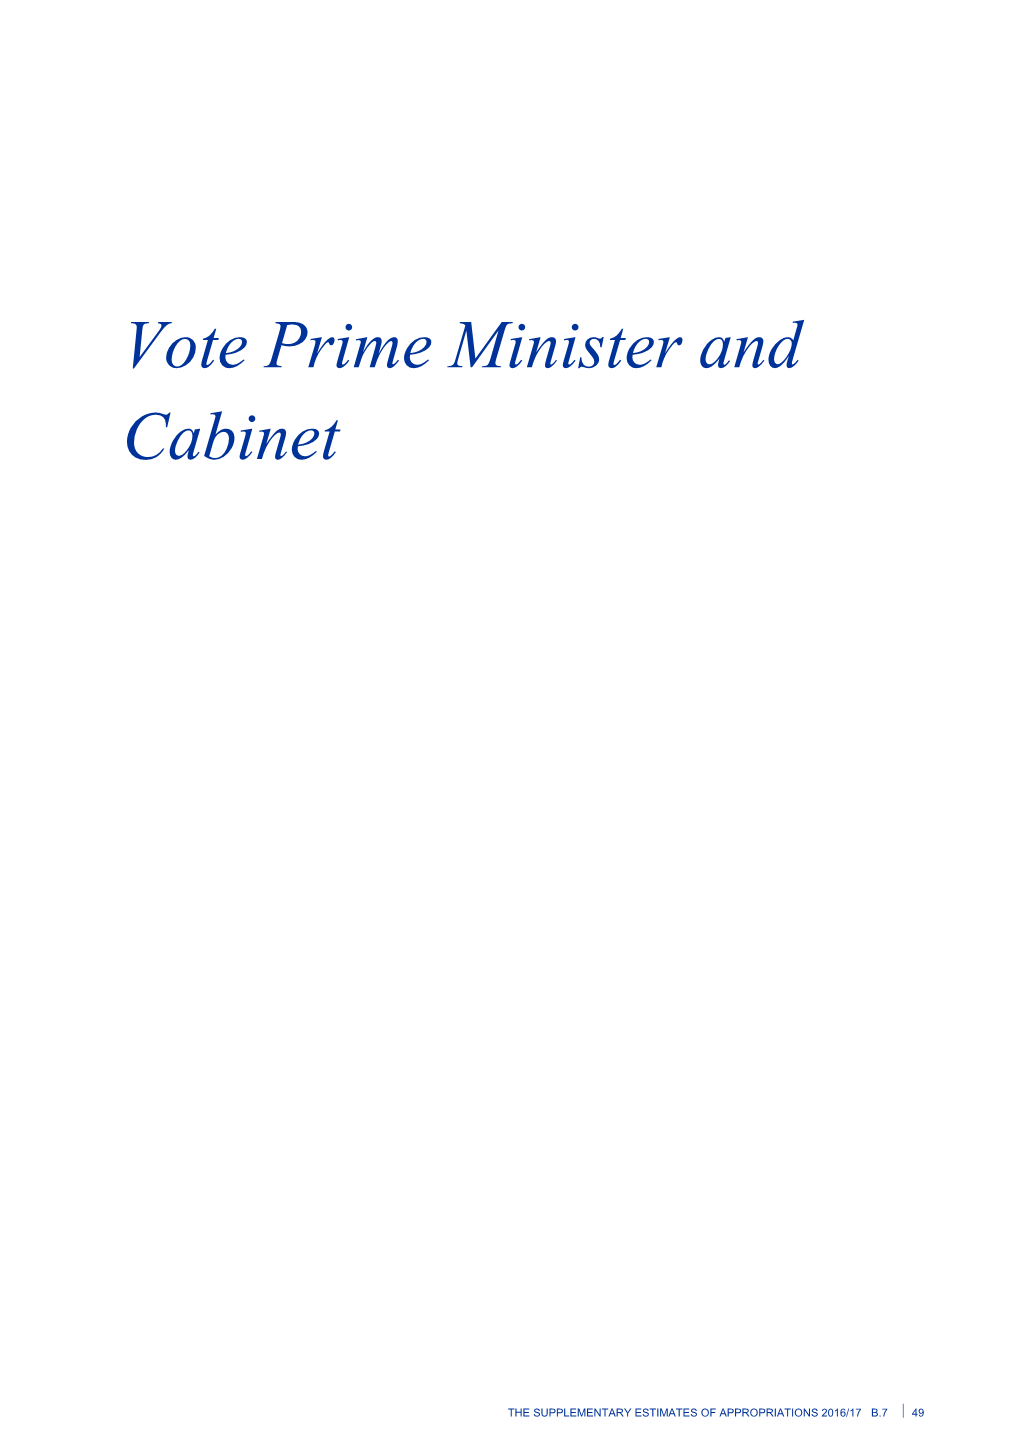 Vote Prime Minister and Cabinet - Supplementary Estimates of Appropriations 2016/17 - Budget